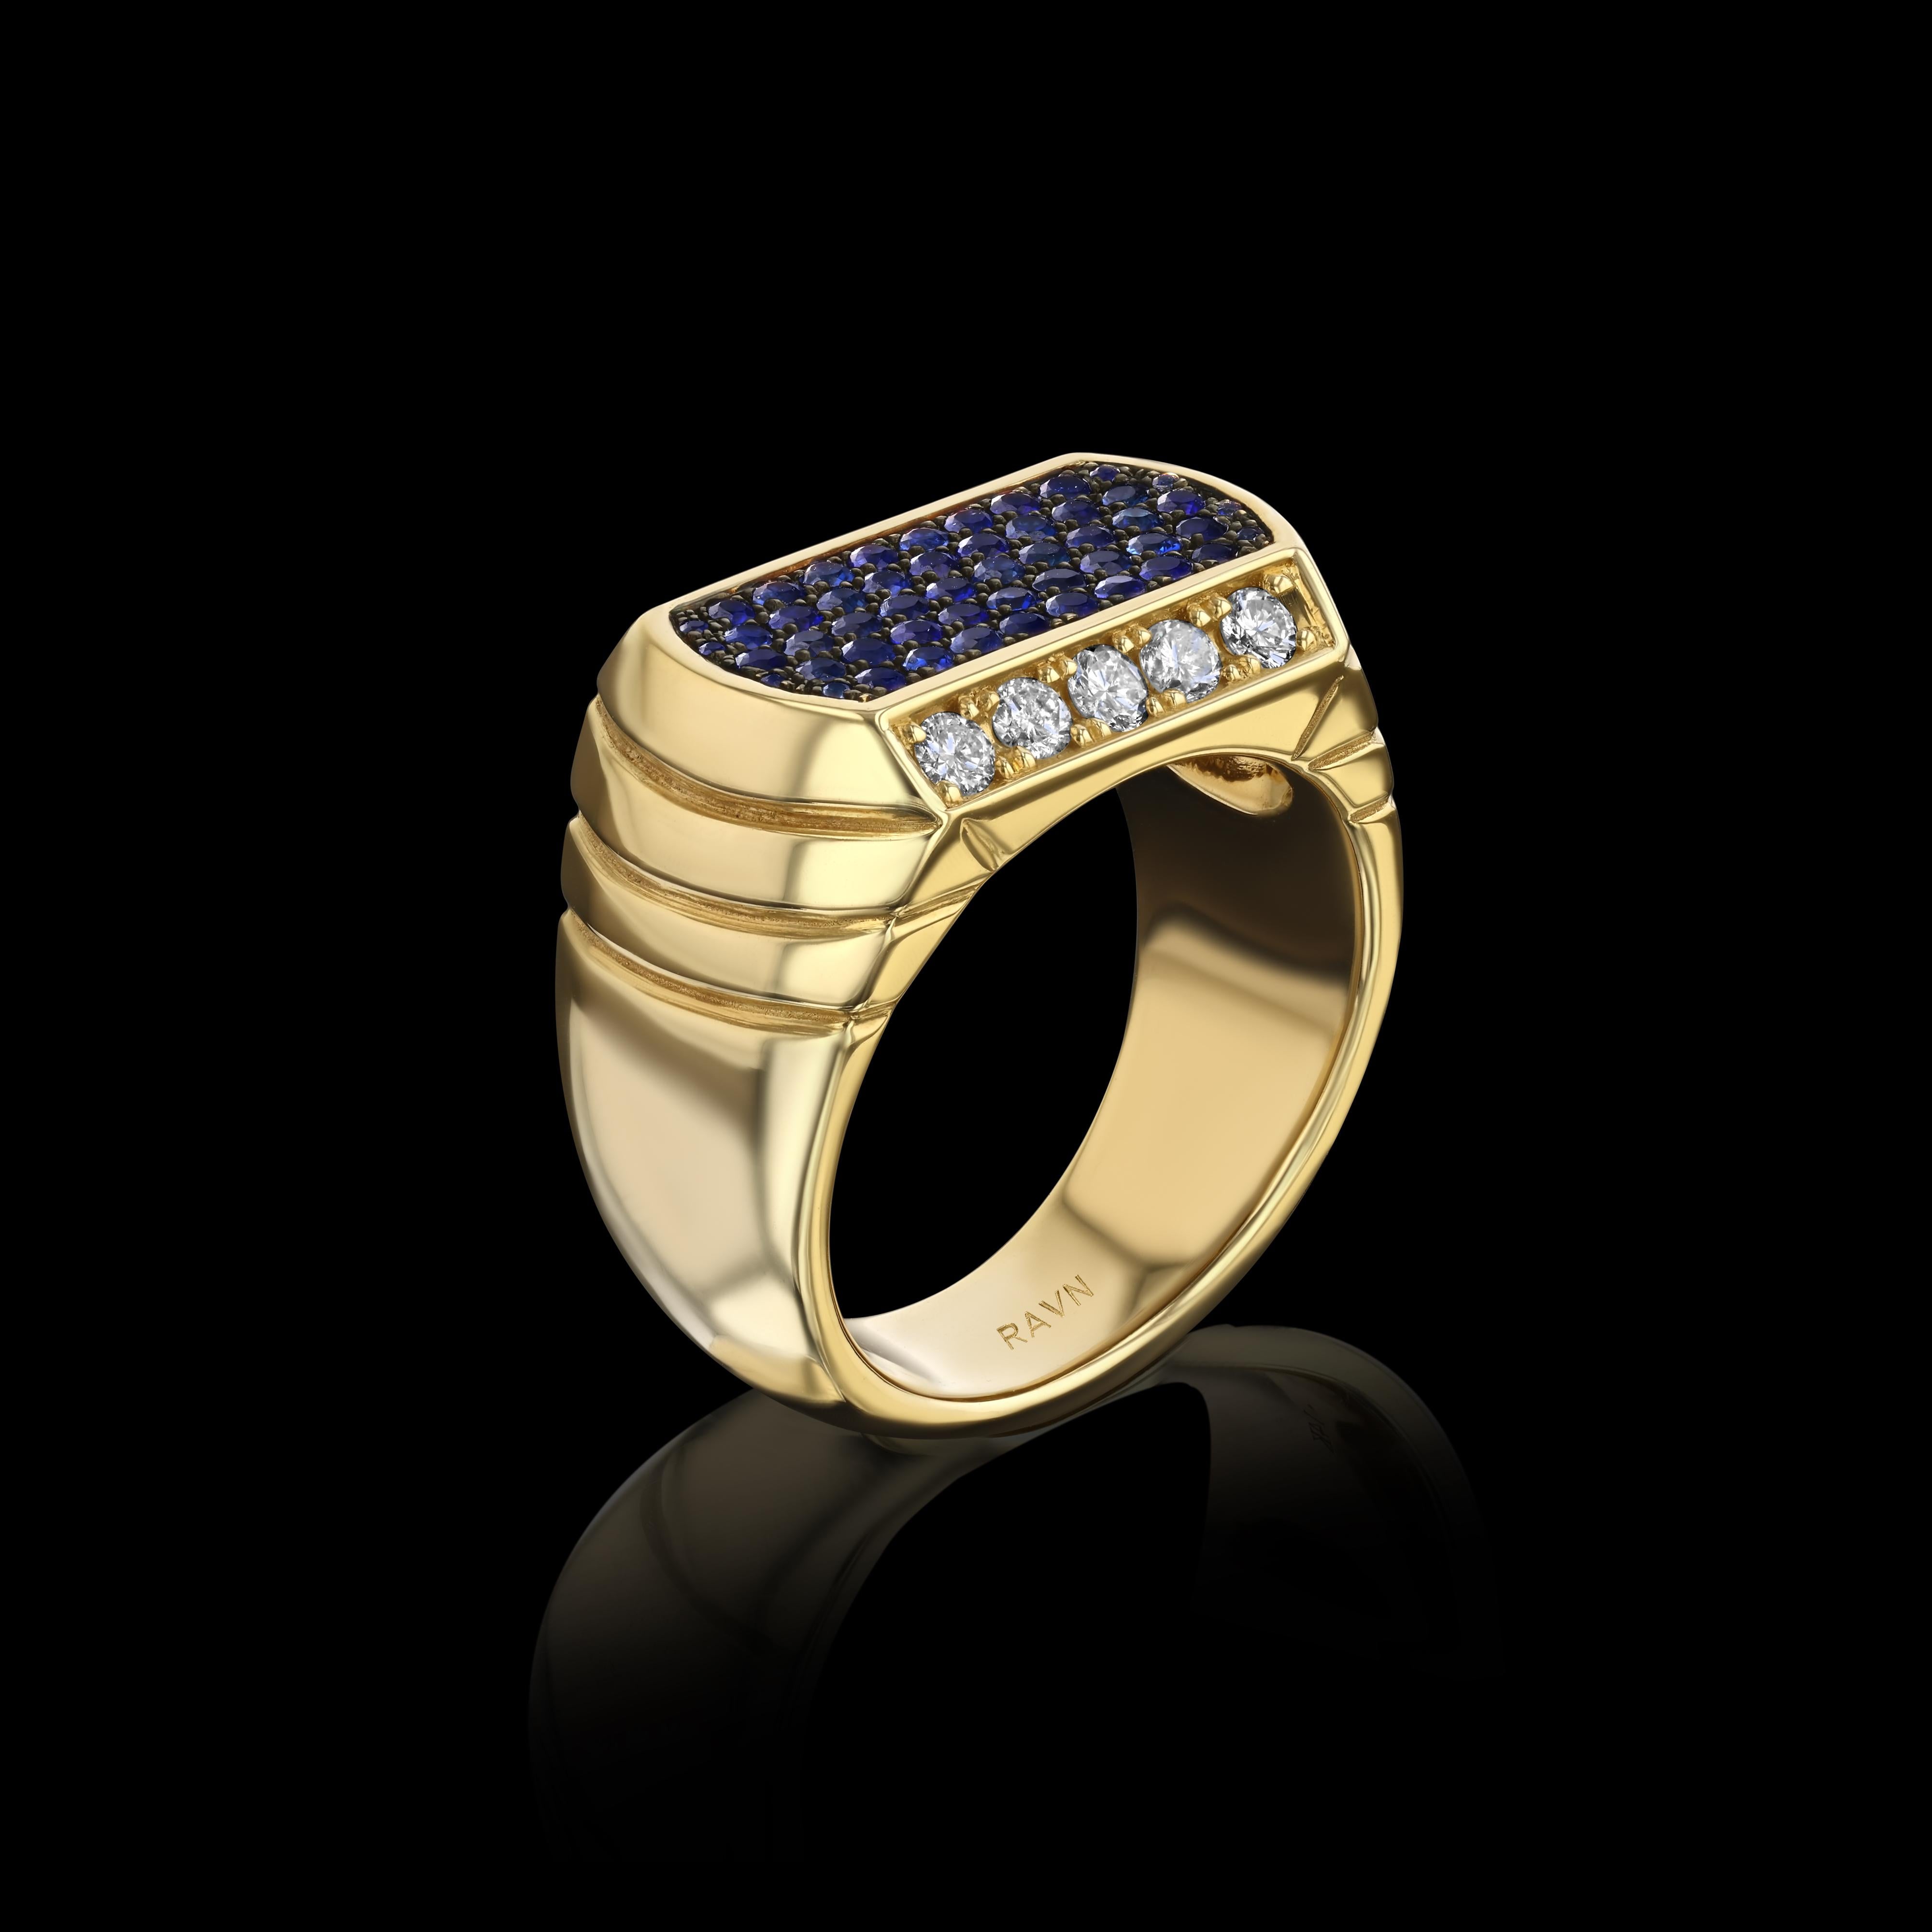 14k yellow gold, Unisex, Art Deco, Signet RIng with 10 Diamonds (.60ct) and 52 Sapphires (.95ct).